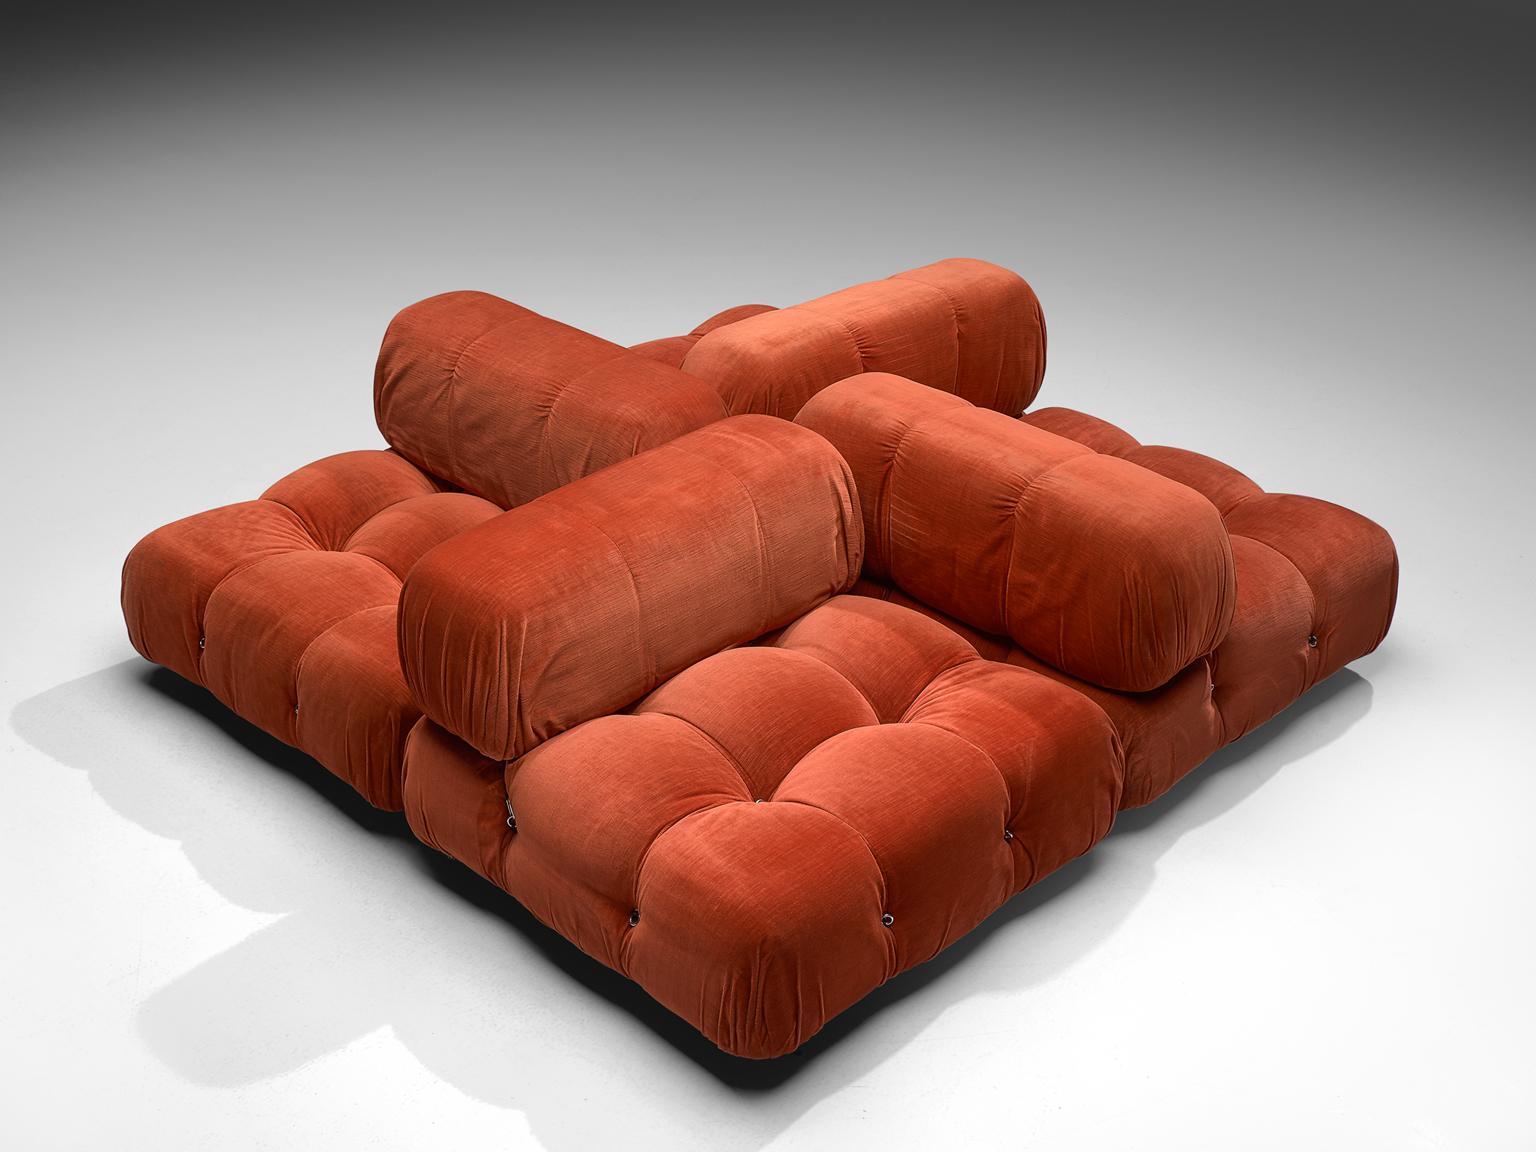 Mario Bellini, modular 'Cameleonda' sofa in in orange corduroy, Italy 1972.

The sectional elements of this sofa can be used freely and apart from one another. The upholstery on this piece features an orange original velvet. The backs are provided